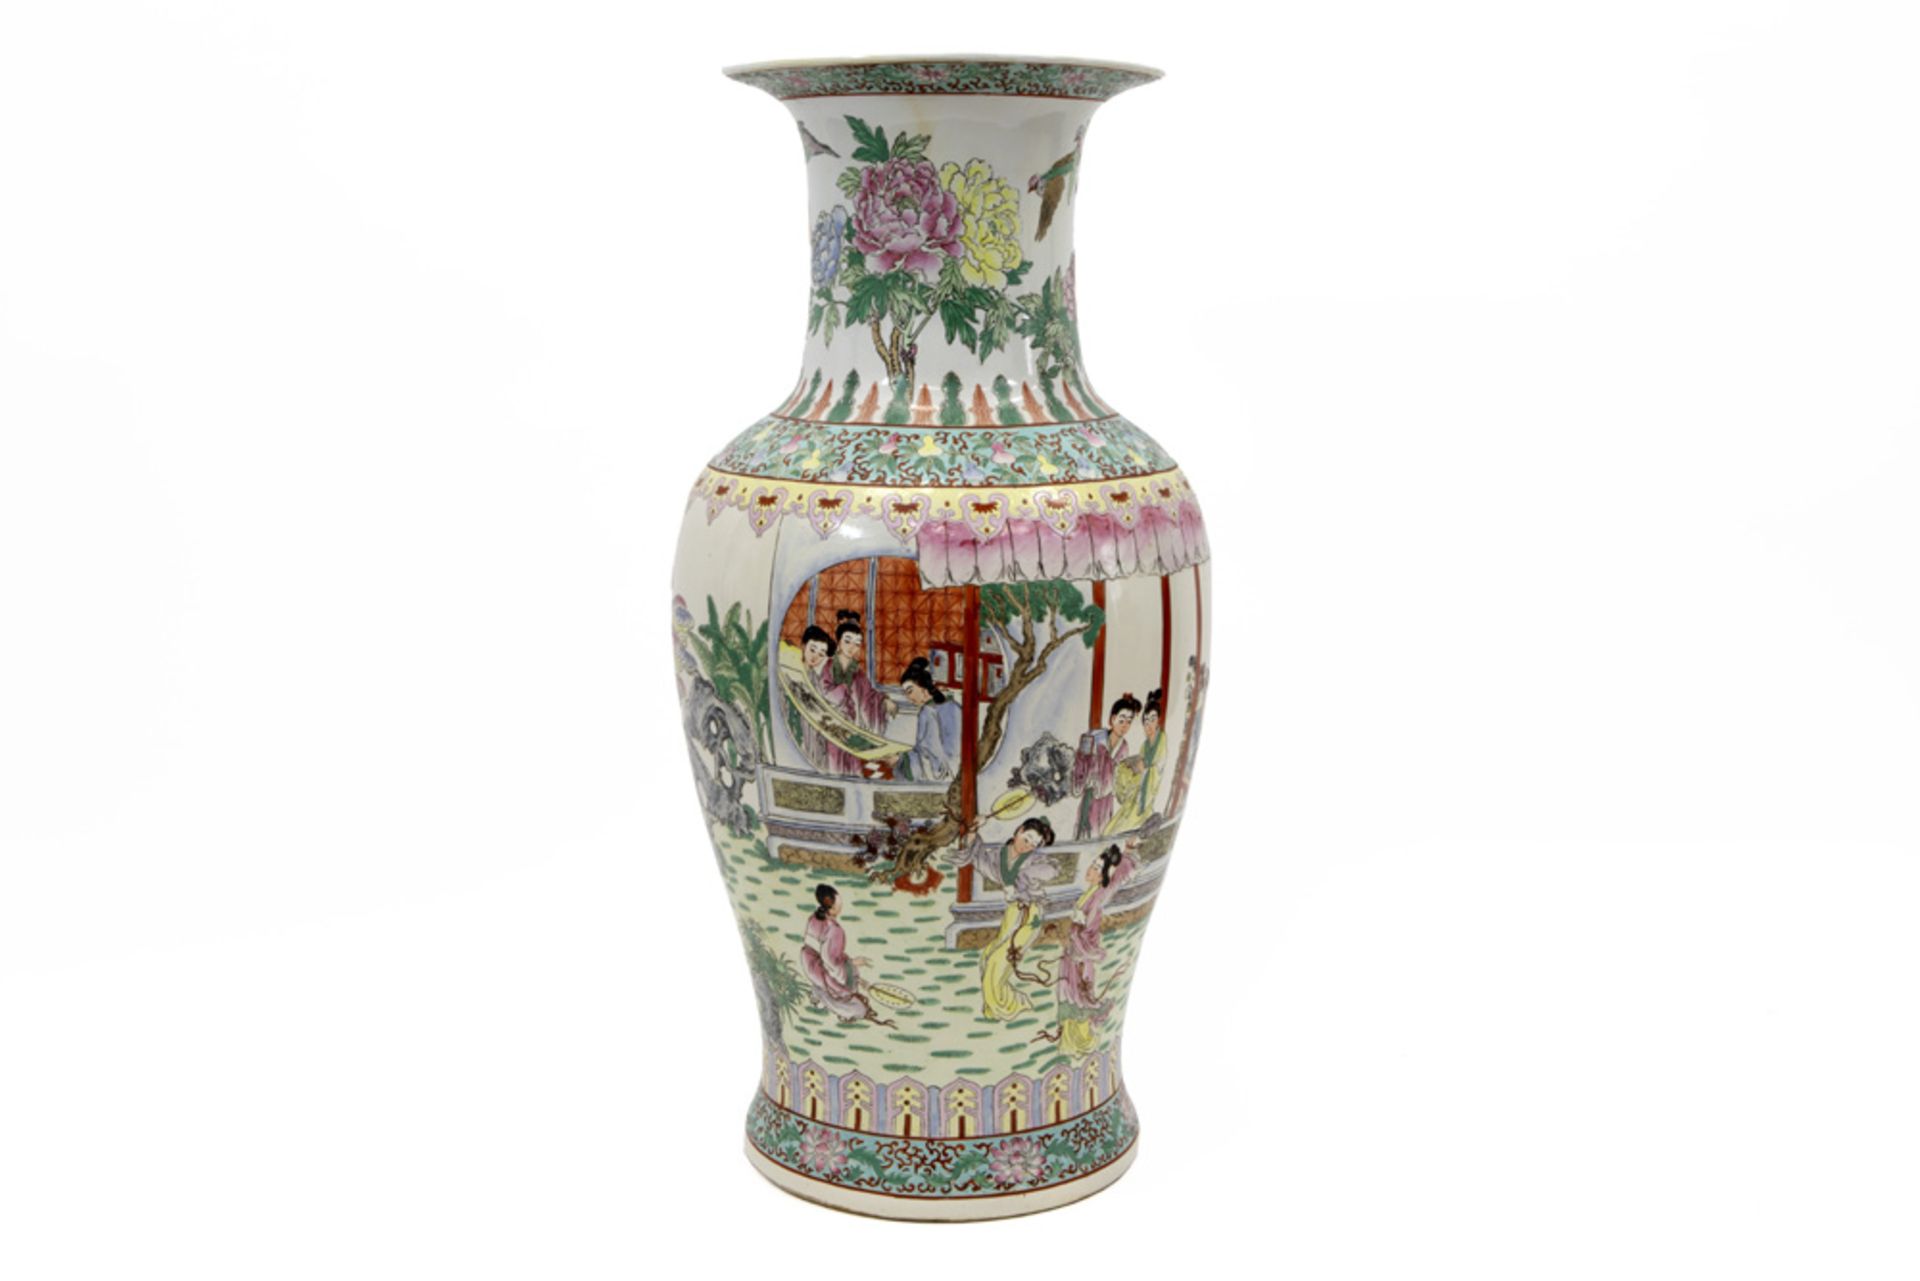 20th Cent. Chinese vase in porcelain with a polychrome decor ||20ste eeuwse Chinese vaas in